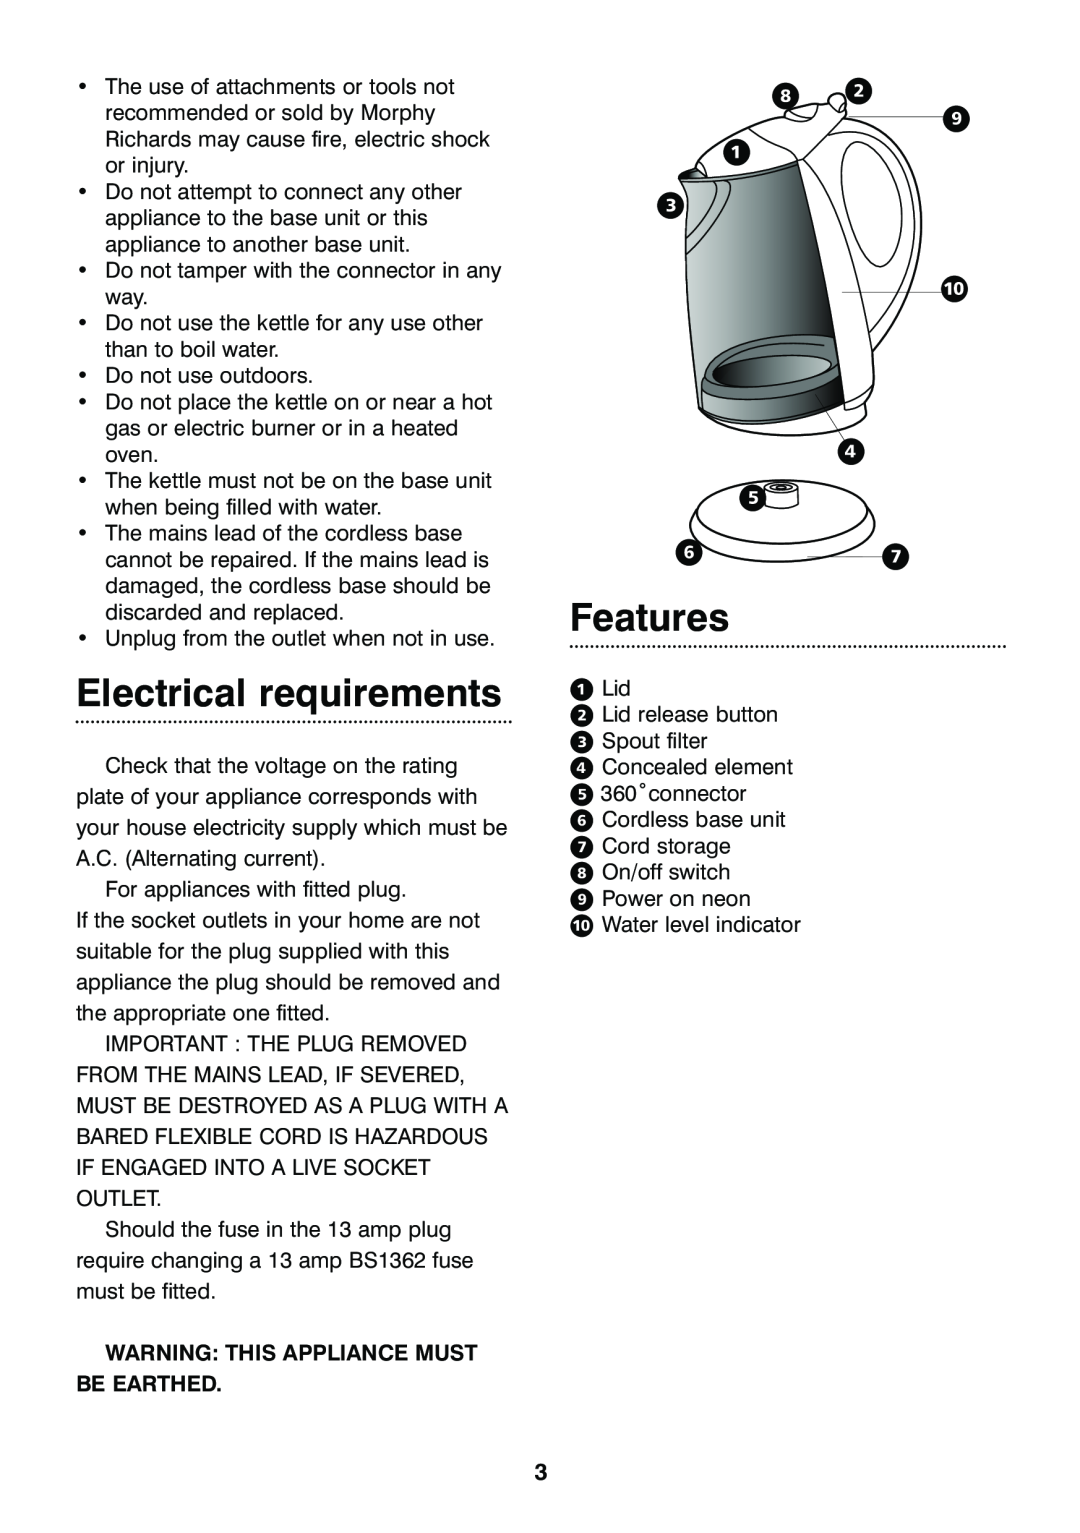 Morphy Richards Reflect glass kettle manual Electrical requirements, Features, Warning This Appliance Must Be Earthed 